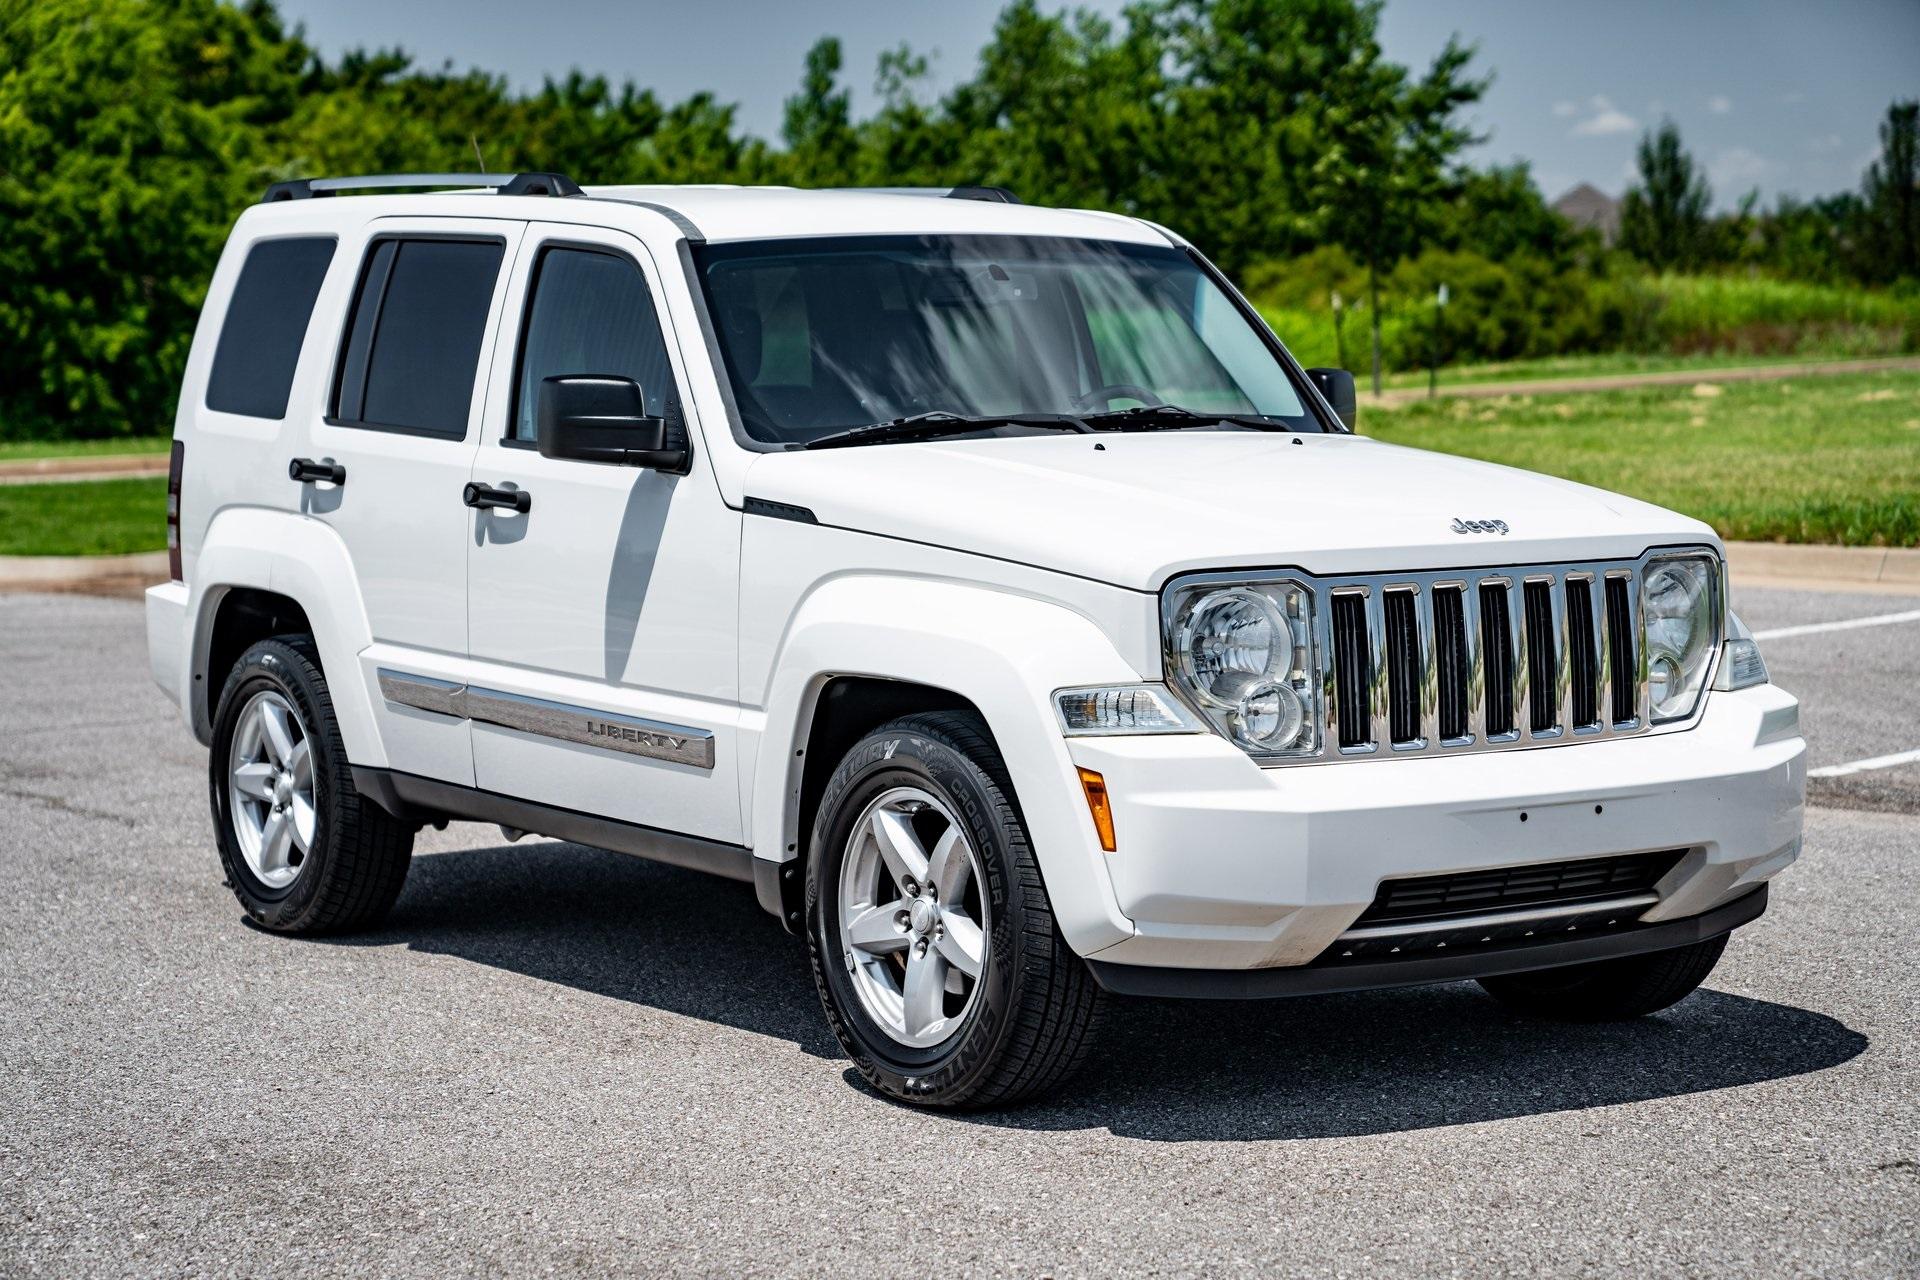 Used 2010 Jeep Liberty Limited For Sale (Sold) | Exotic Motorsports of  Oklahoma Stock #P226